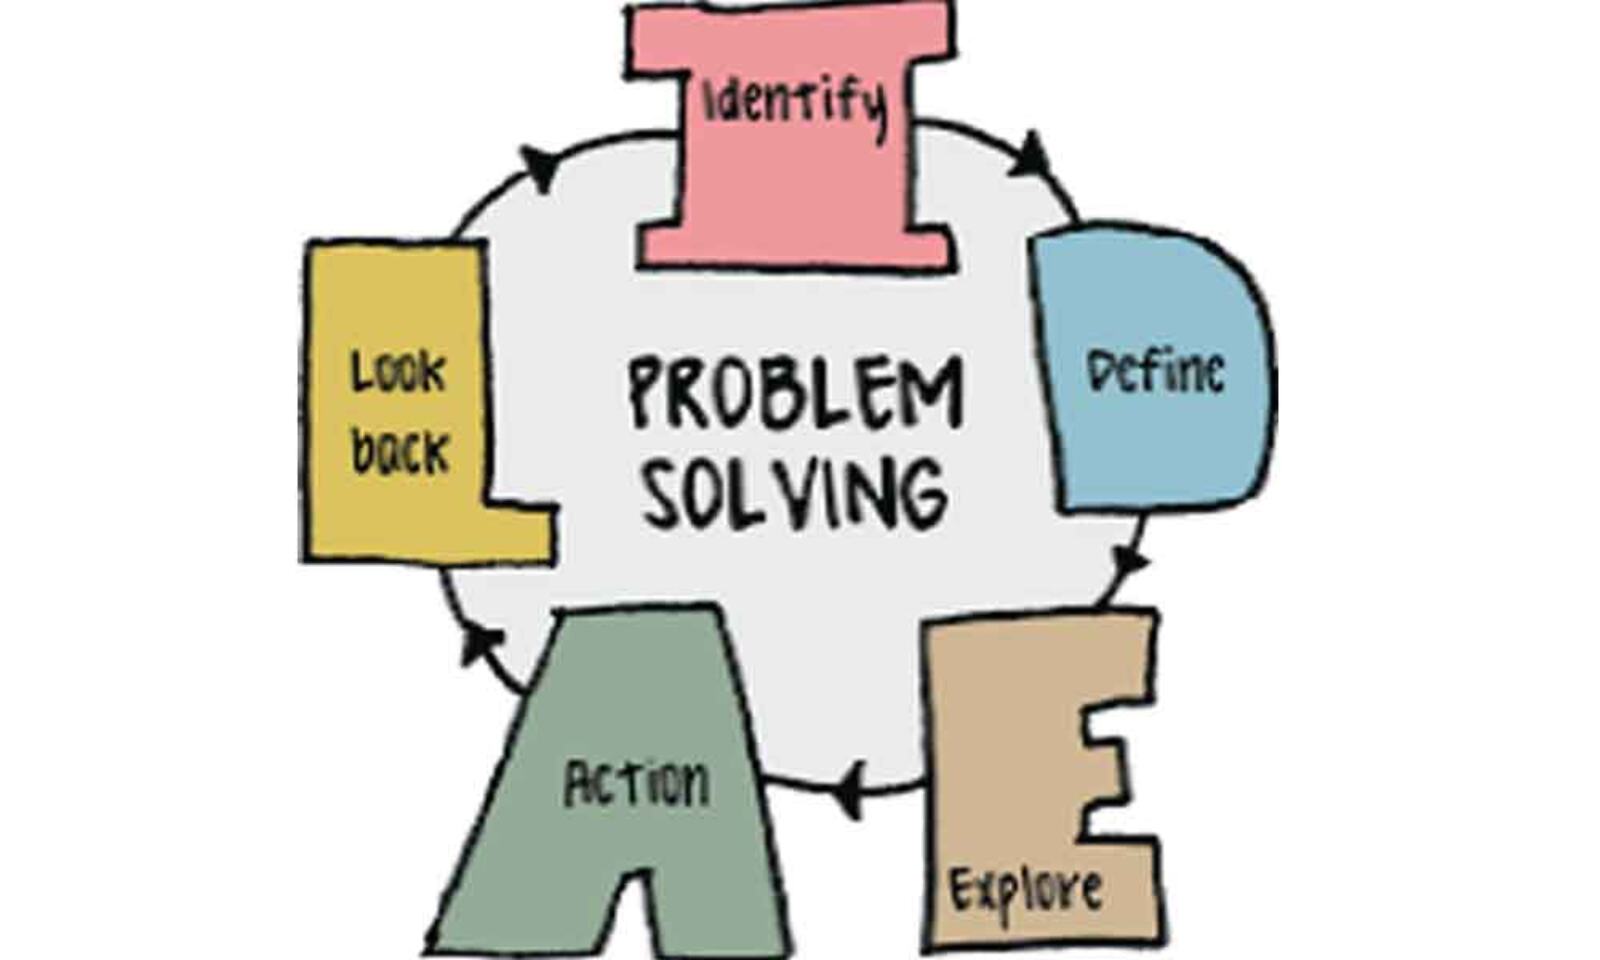 a problem solving style can be described using dimensions of